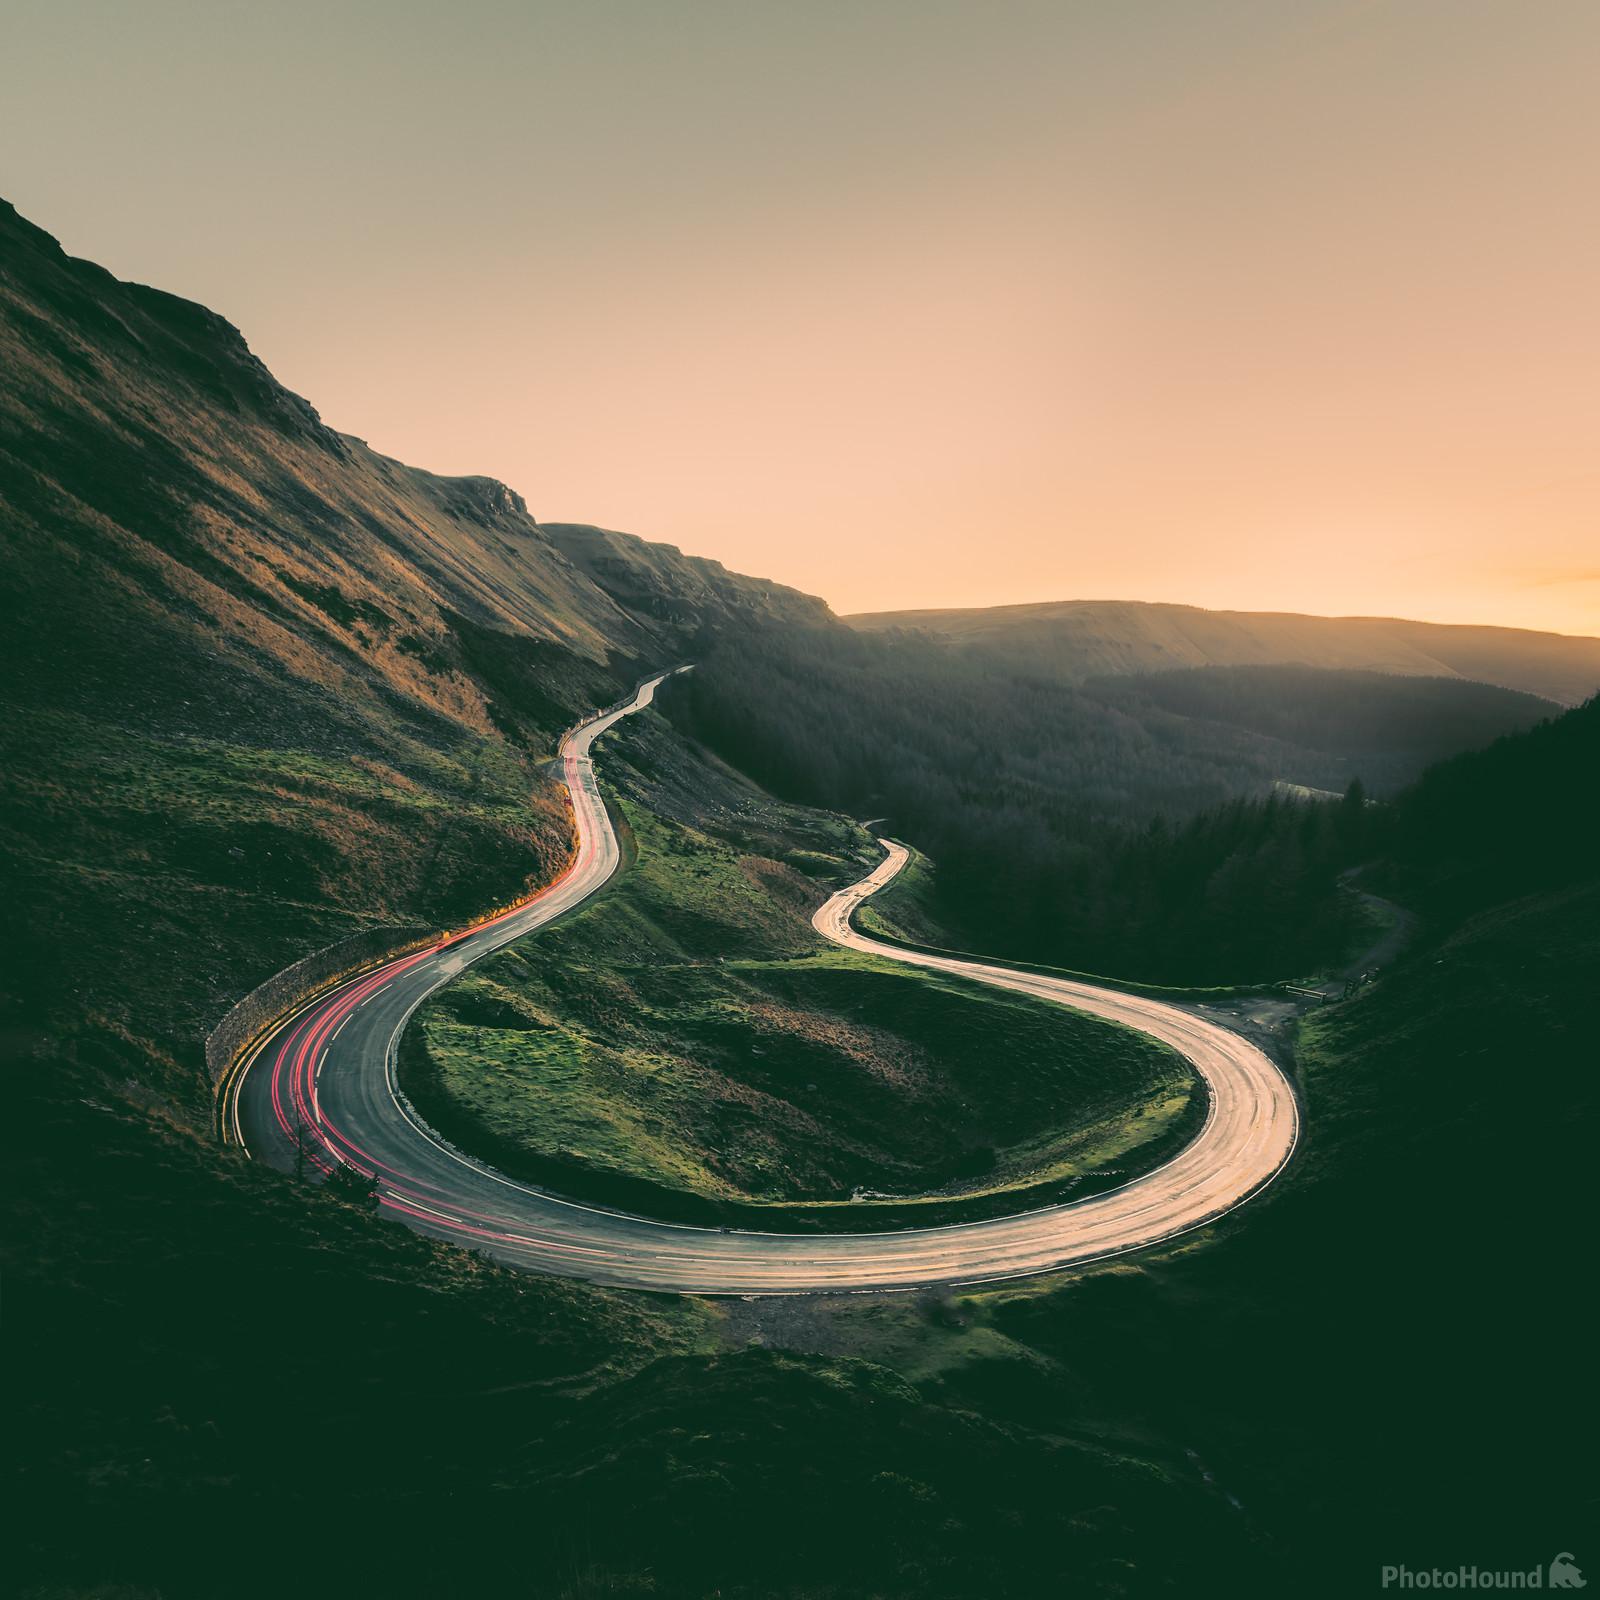 Image of Bwlch Hairpin by Daniel Phillips